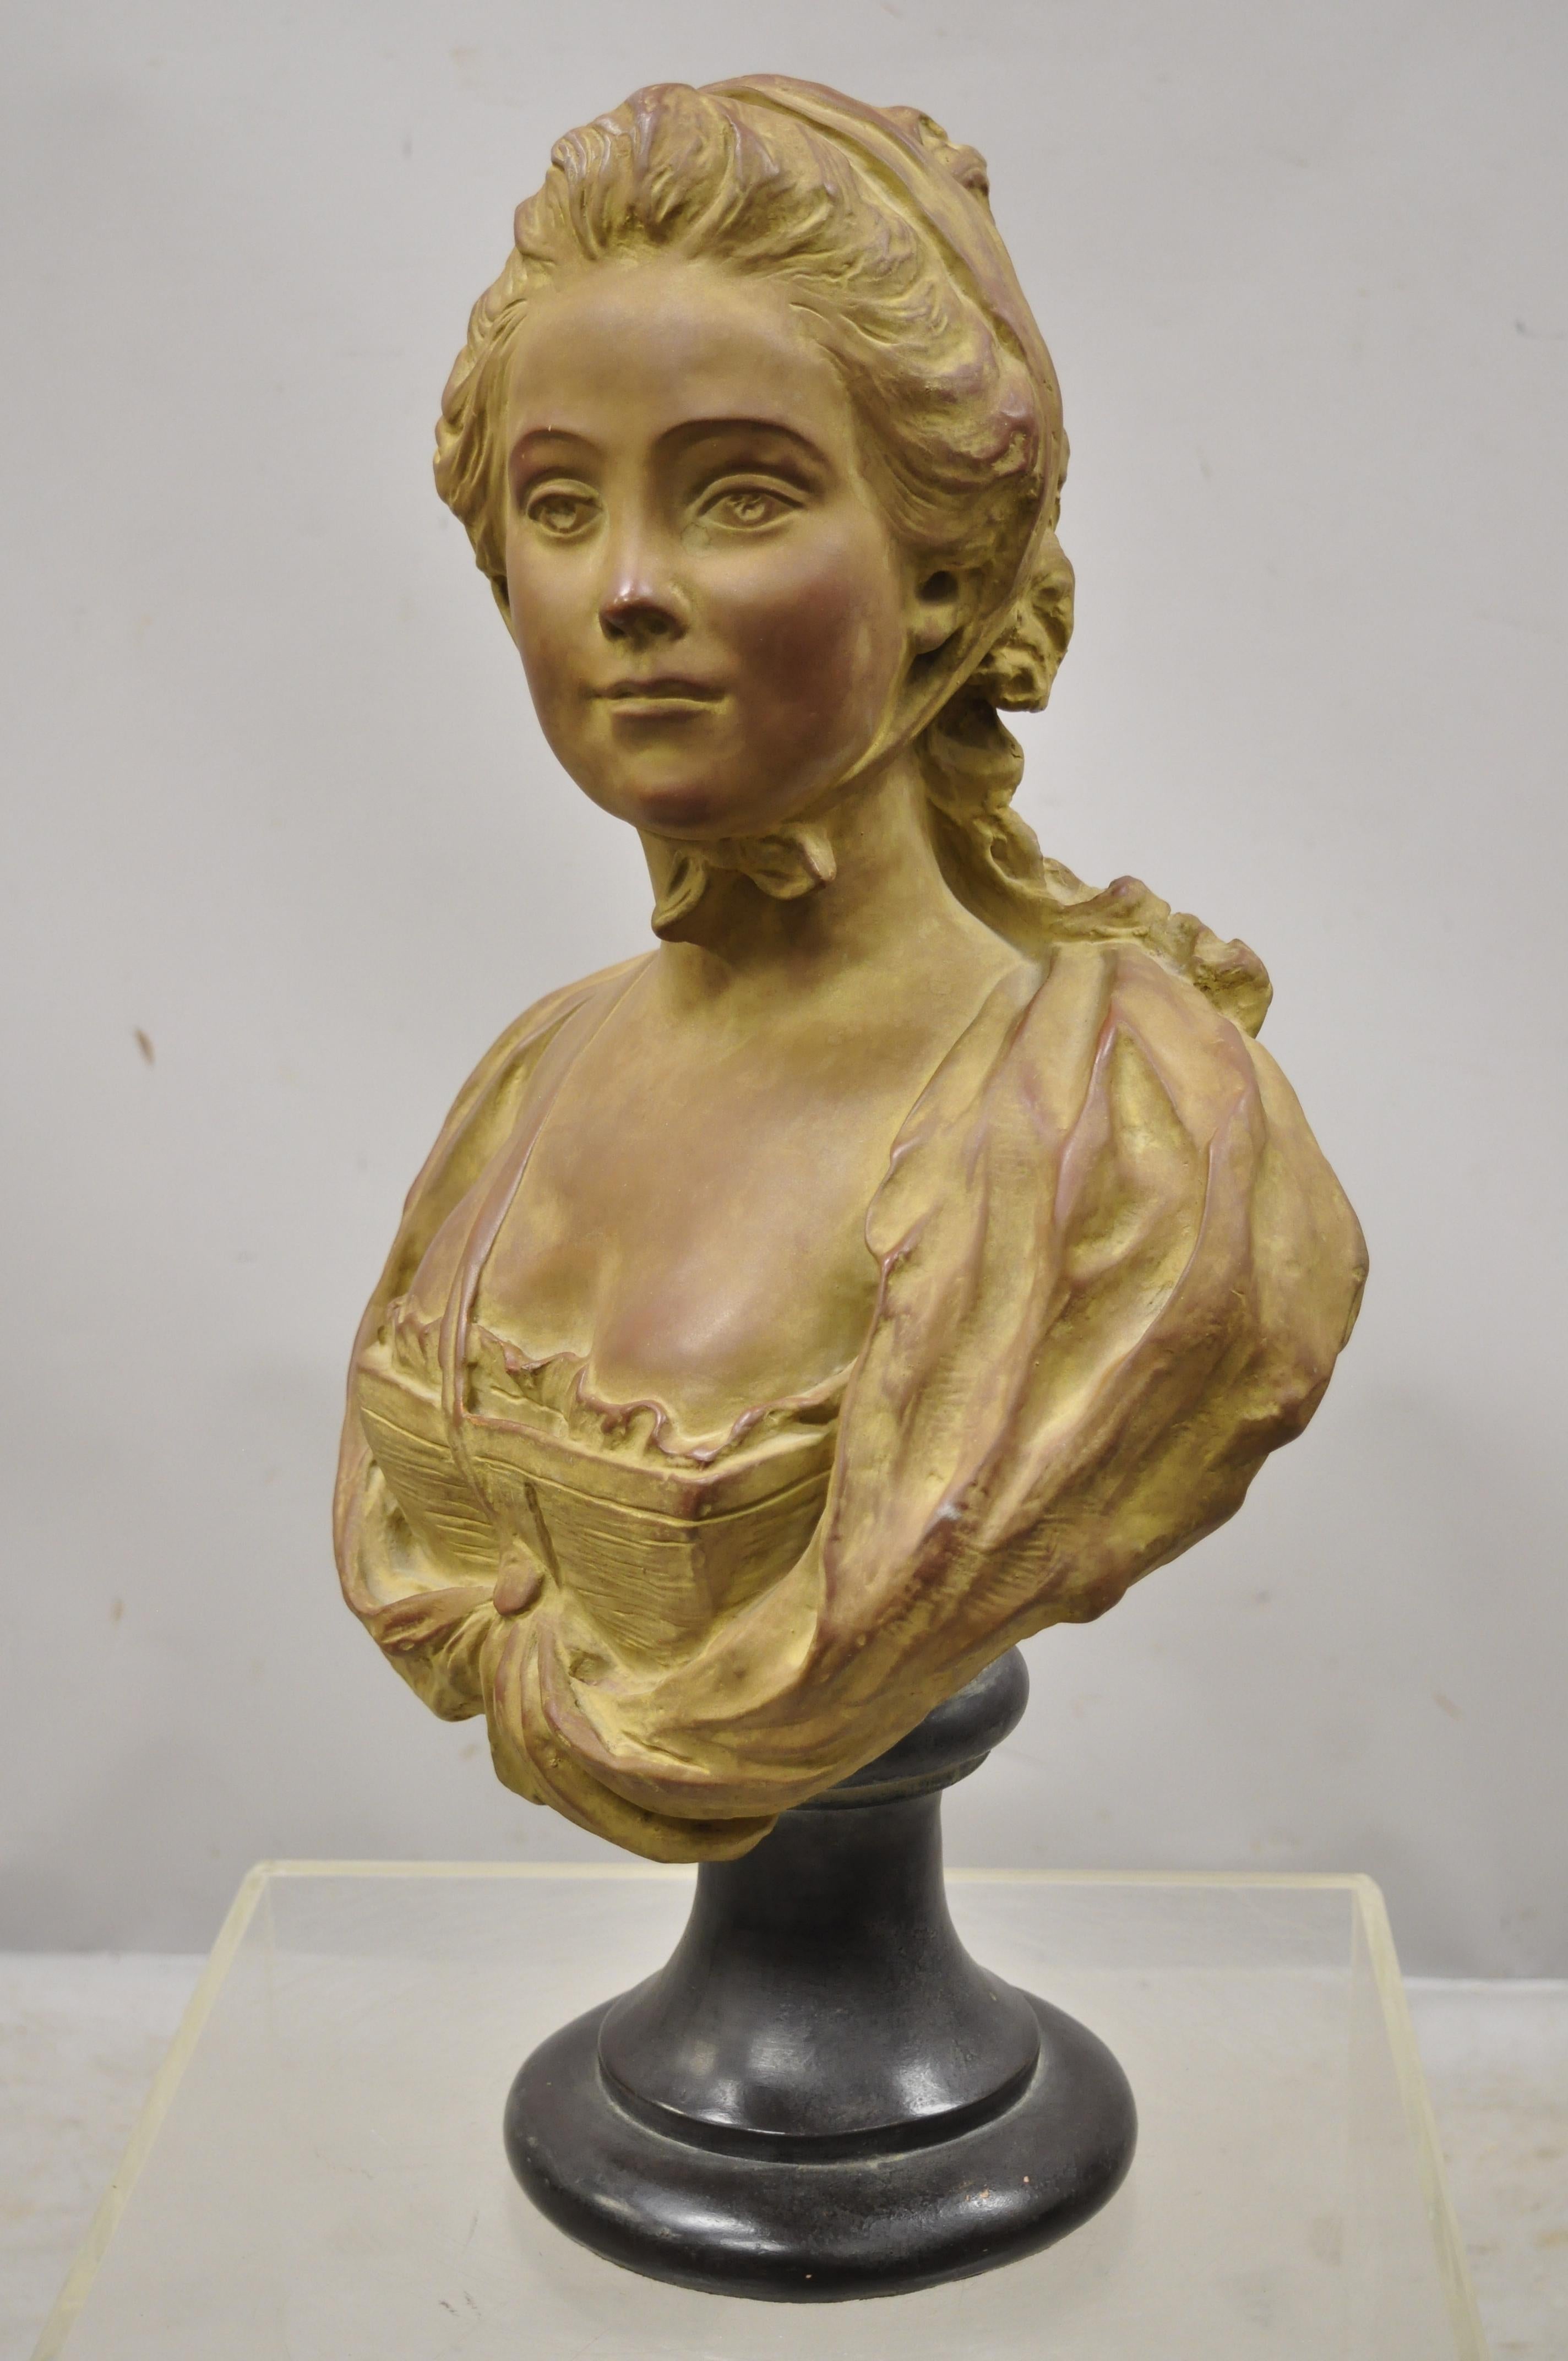 20th Century French Terracotta Bust of Young Woman Sculpture after A. Conord, 1763